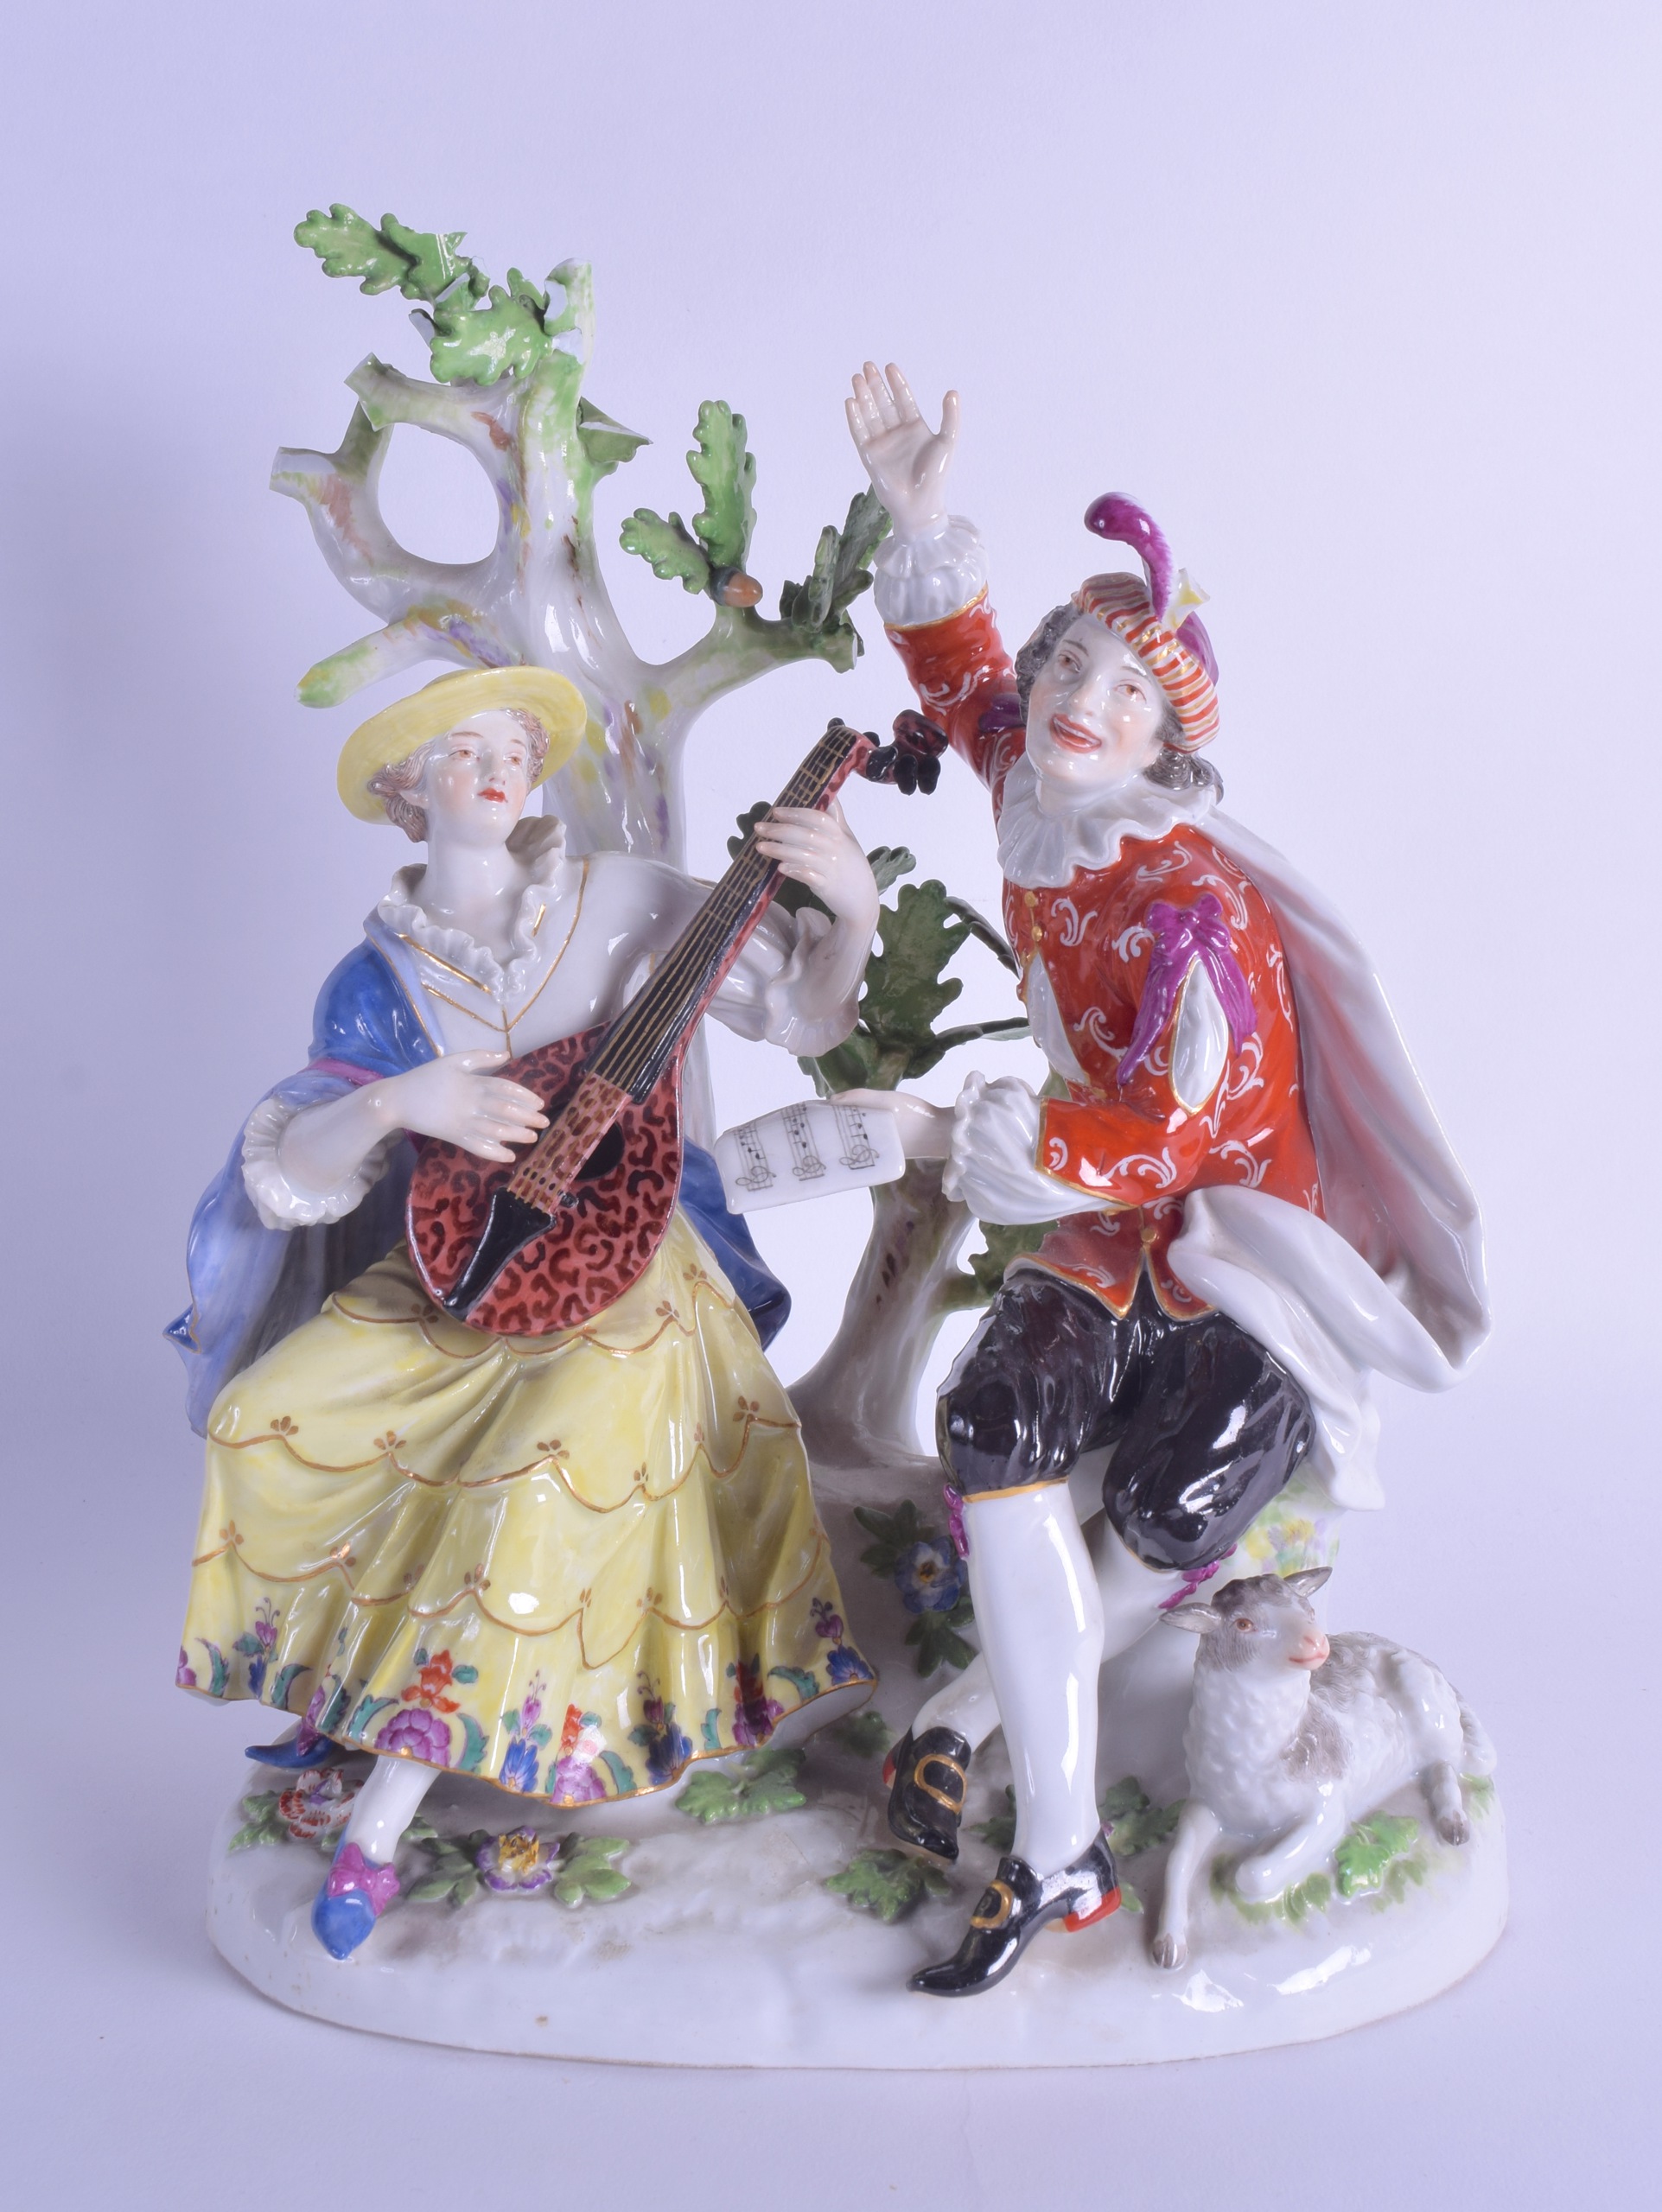 A LARGE 19TH CENTURY MEISSEN PORCELAIN FIGURAL GROUP depicting a male and female performing under